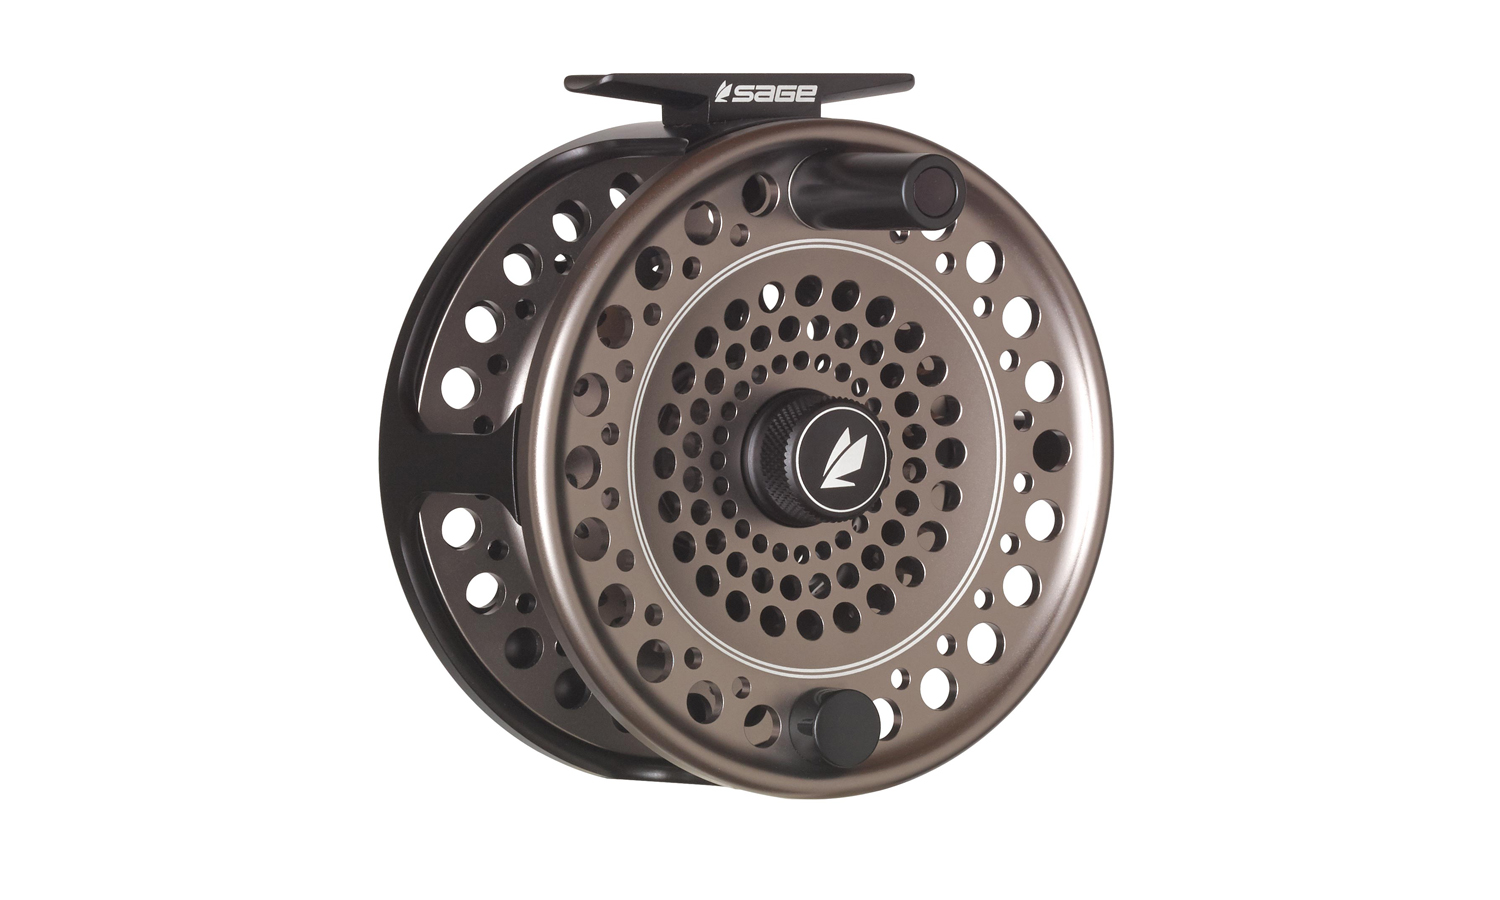 Sage Spey Fly Fishing Reel Product Details